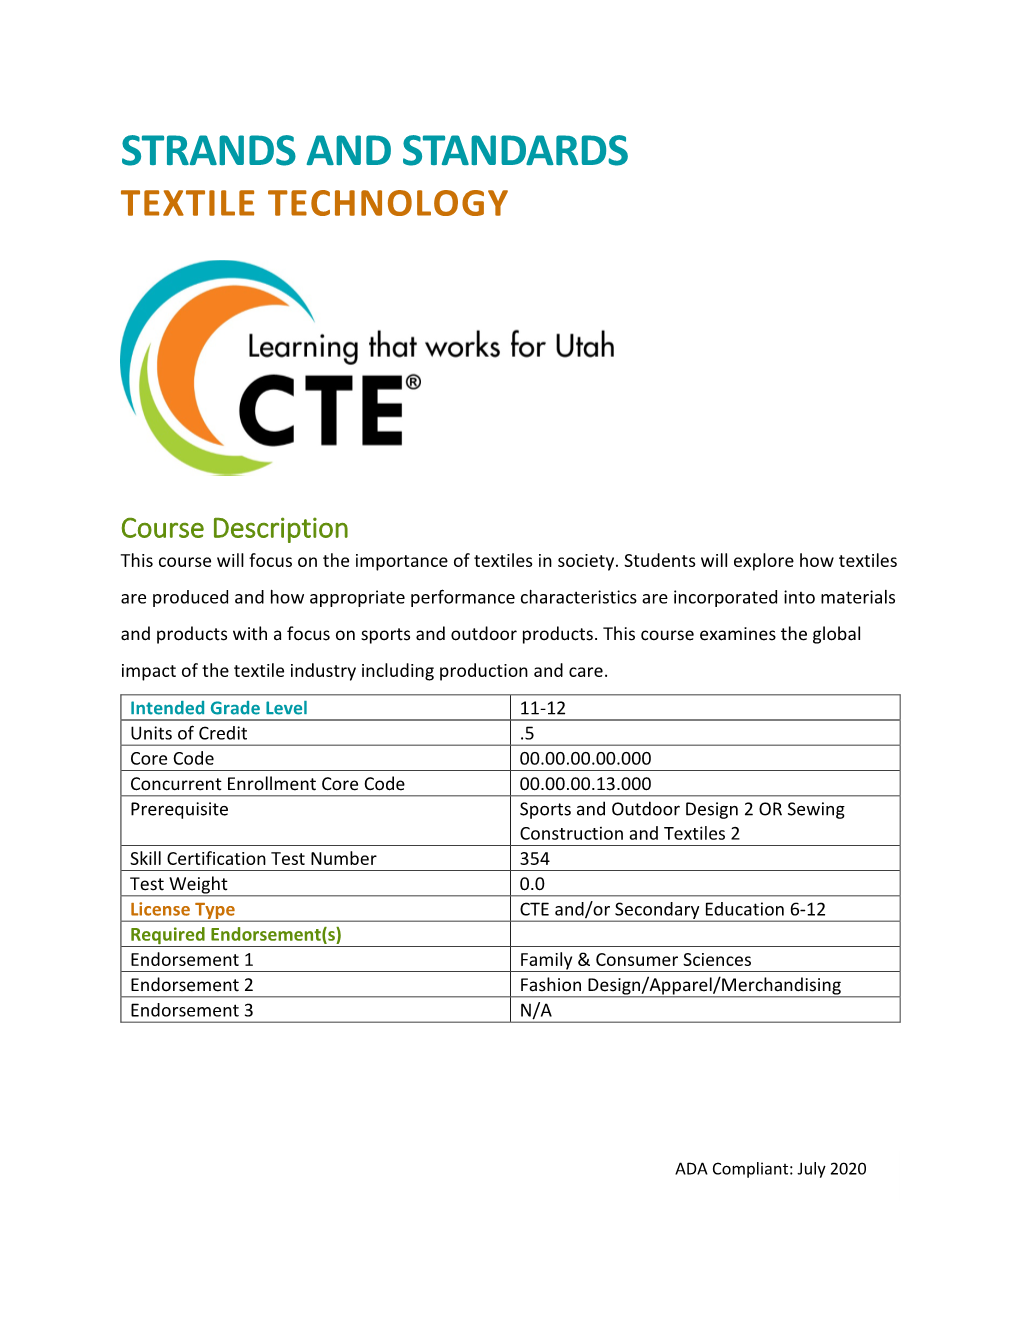 Textile Technology Strands and Standards